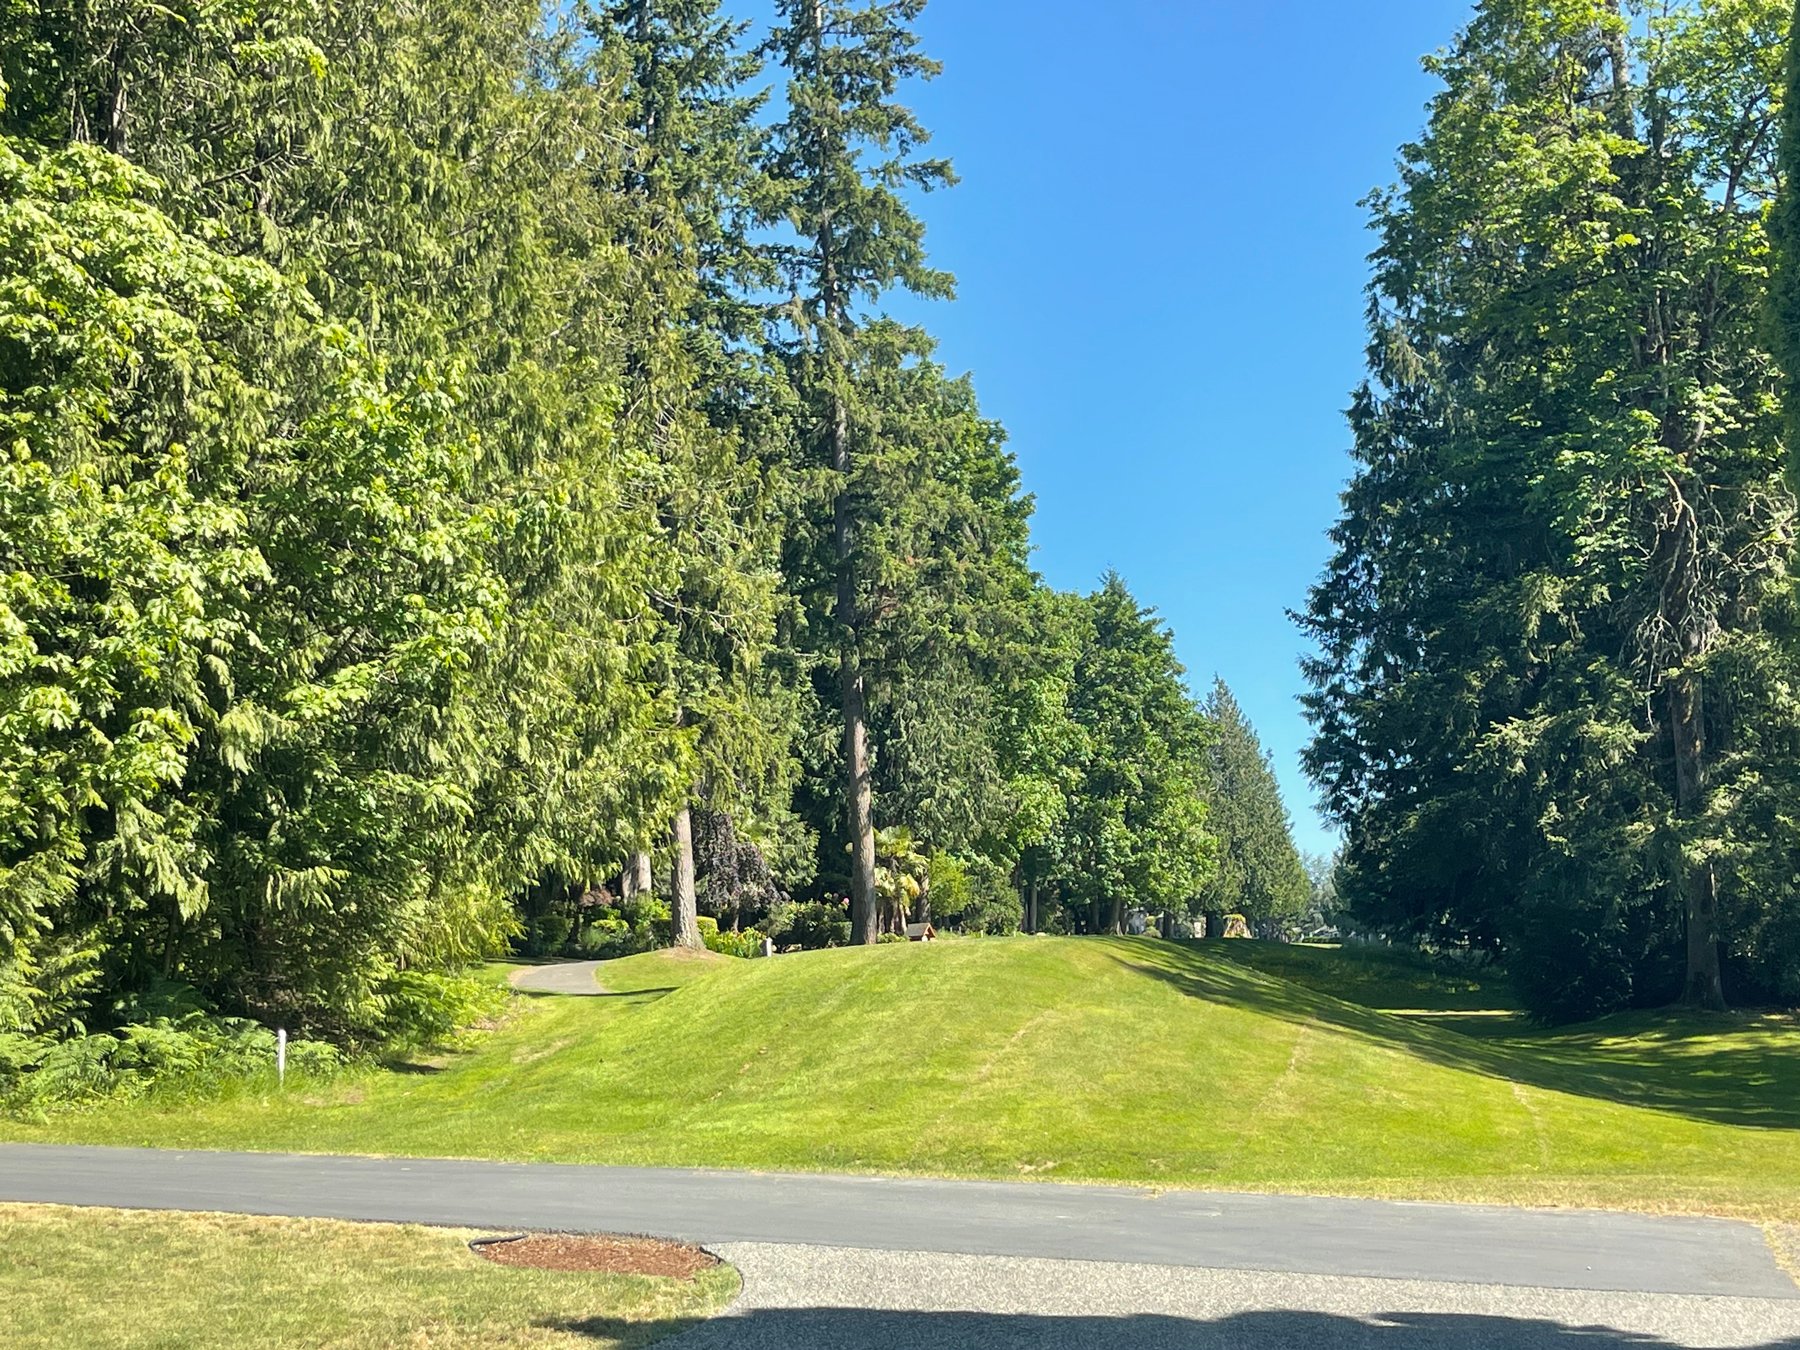 Fairway-view-on-Bear-Creek-Country-Club-golf-course-in-Woodinville-wa.